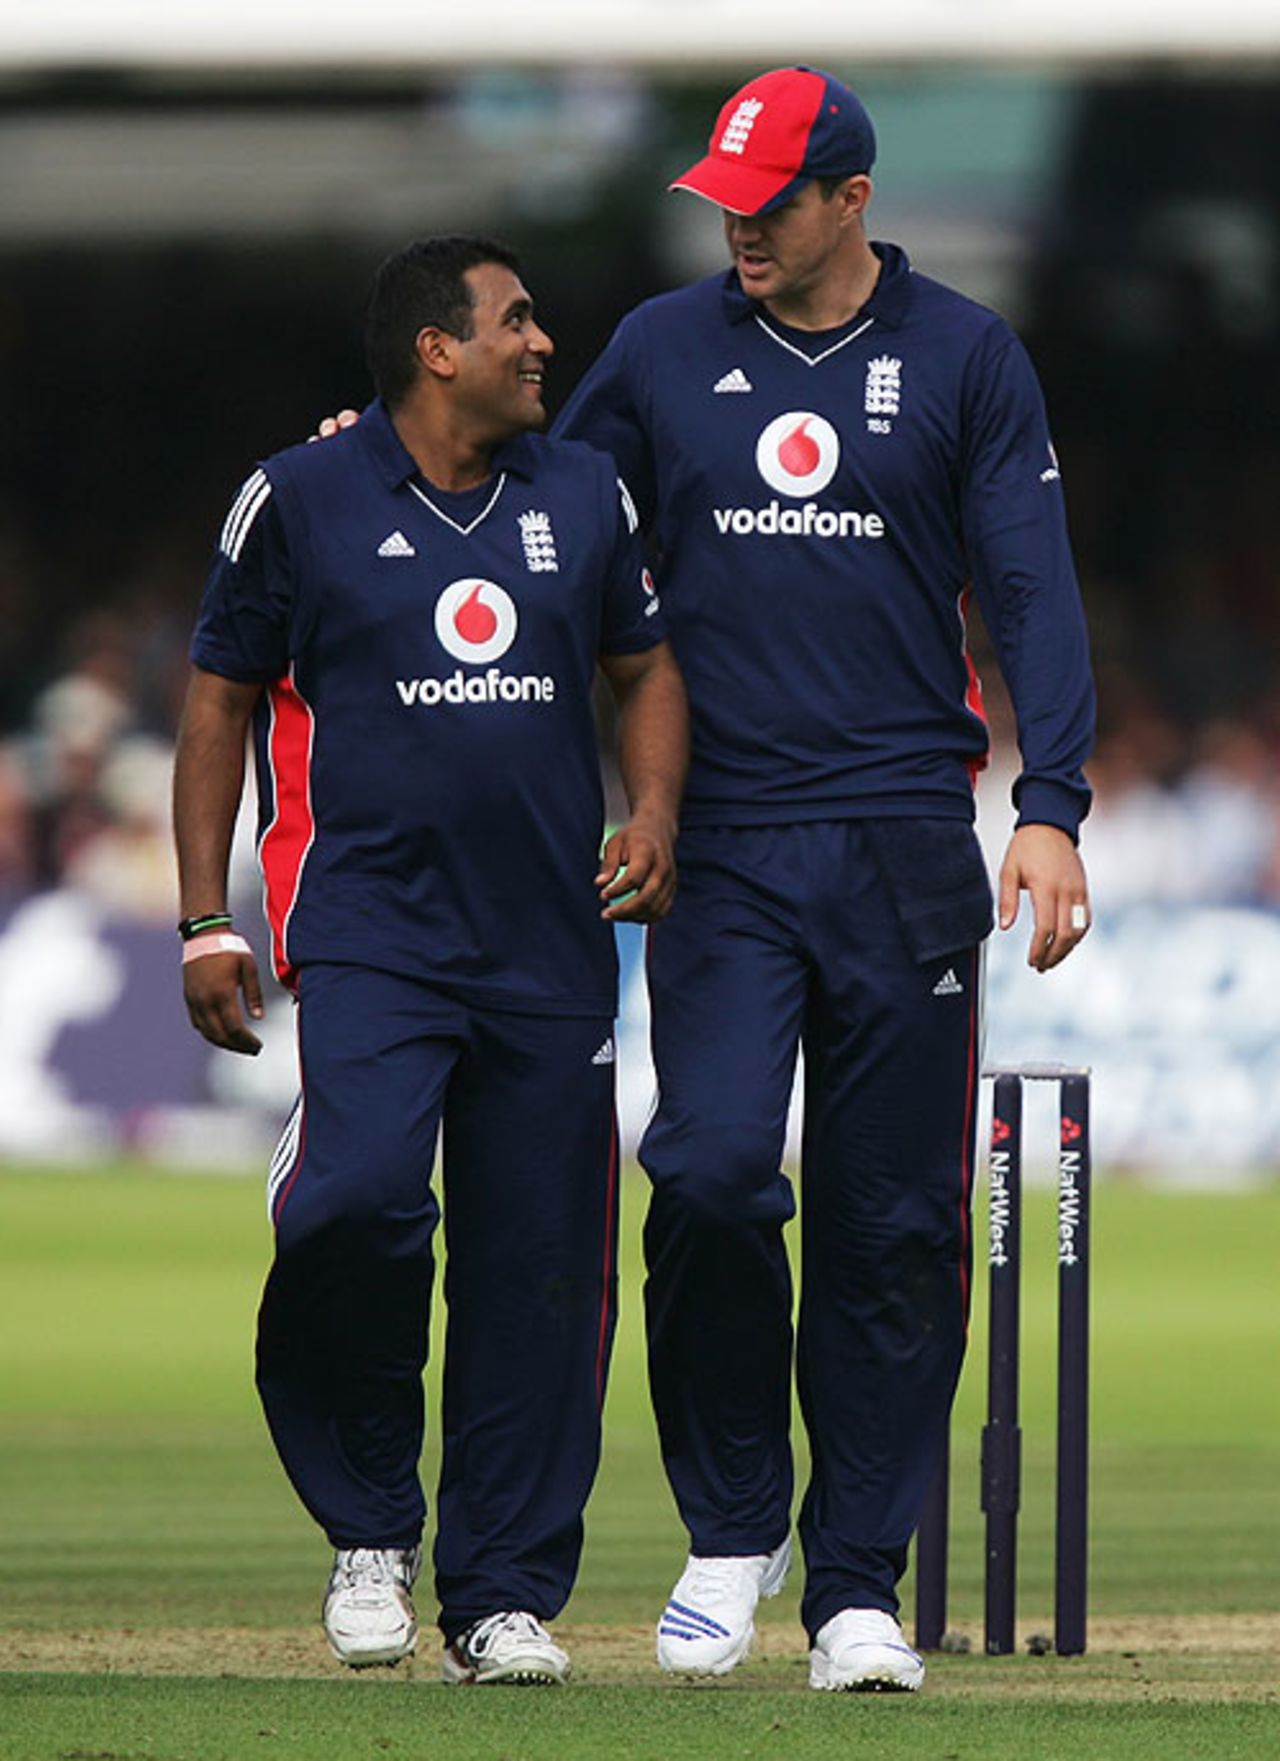 Wide-eyed admiration: Samit Patel chats to his captain, Kevin Pietersen, England v South Africa, 4th ODI, Lord's, August 31, 2008